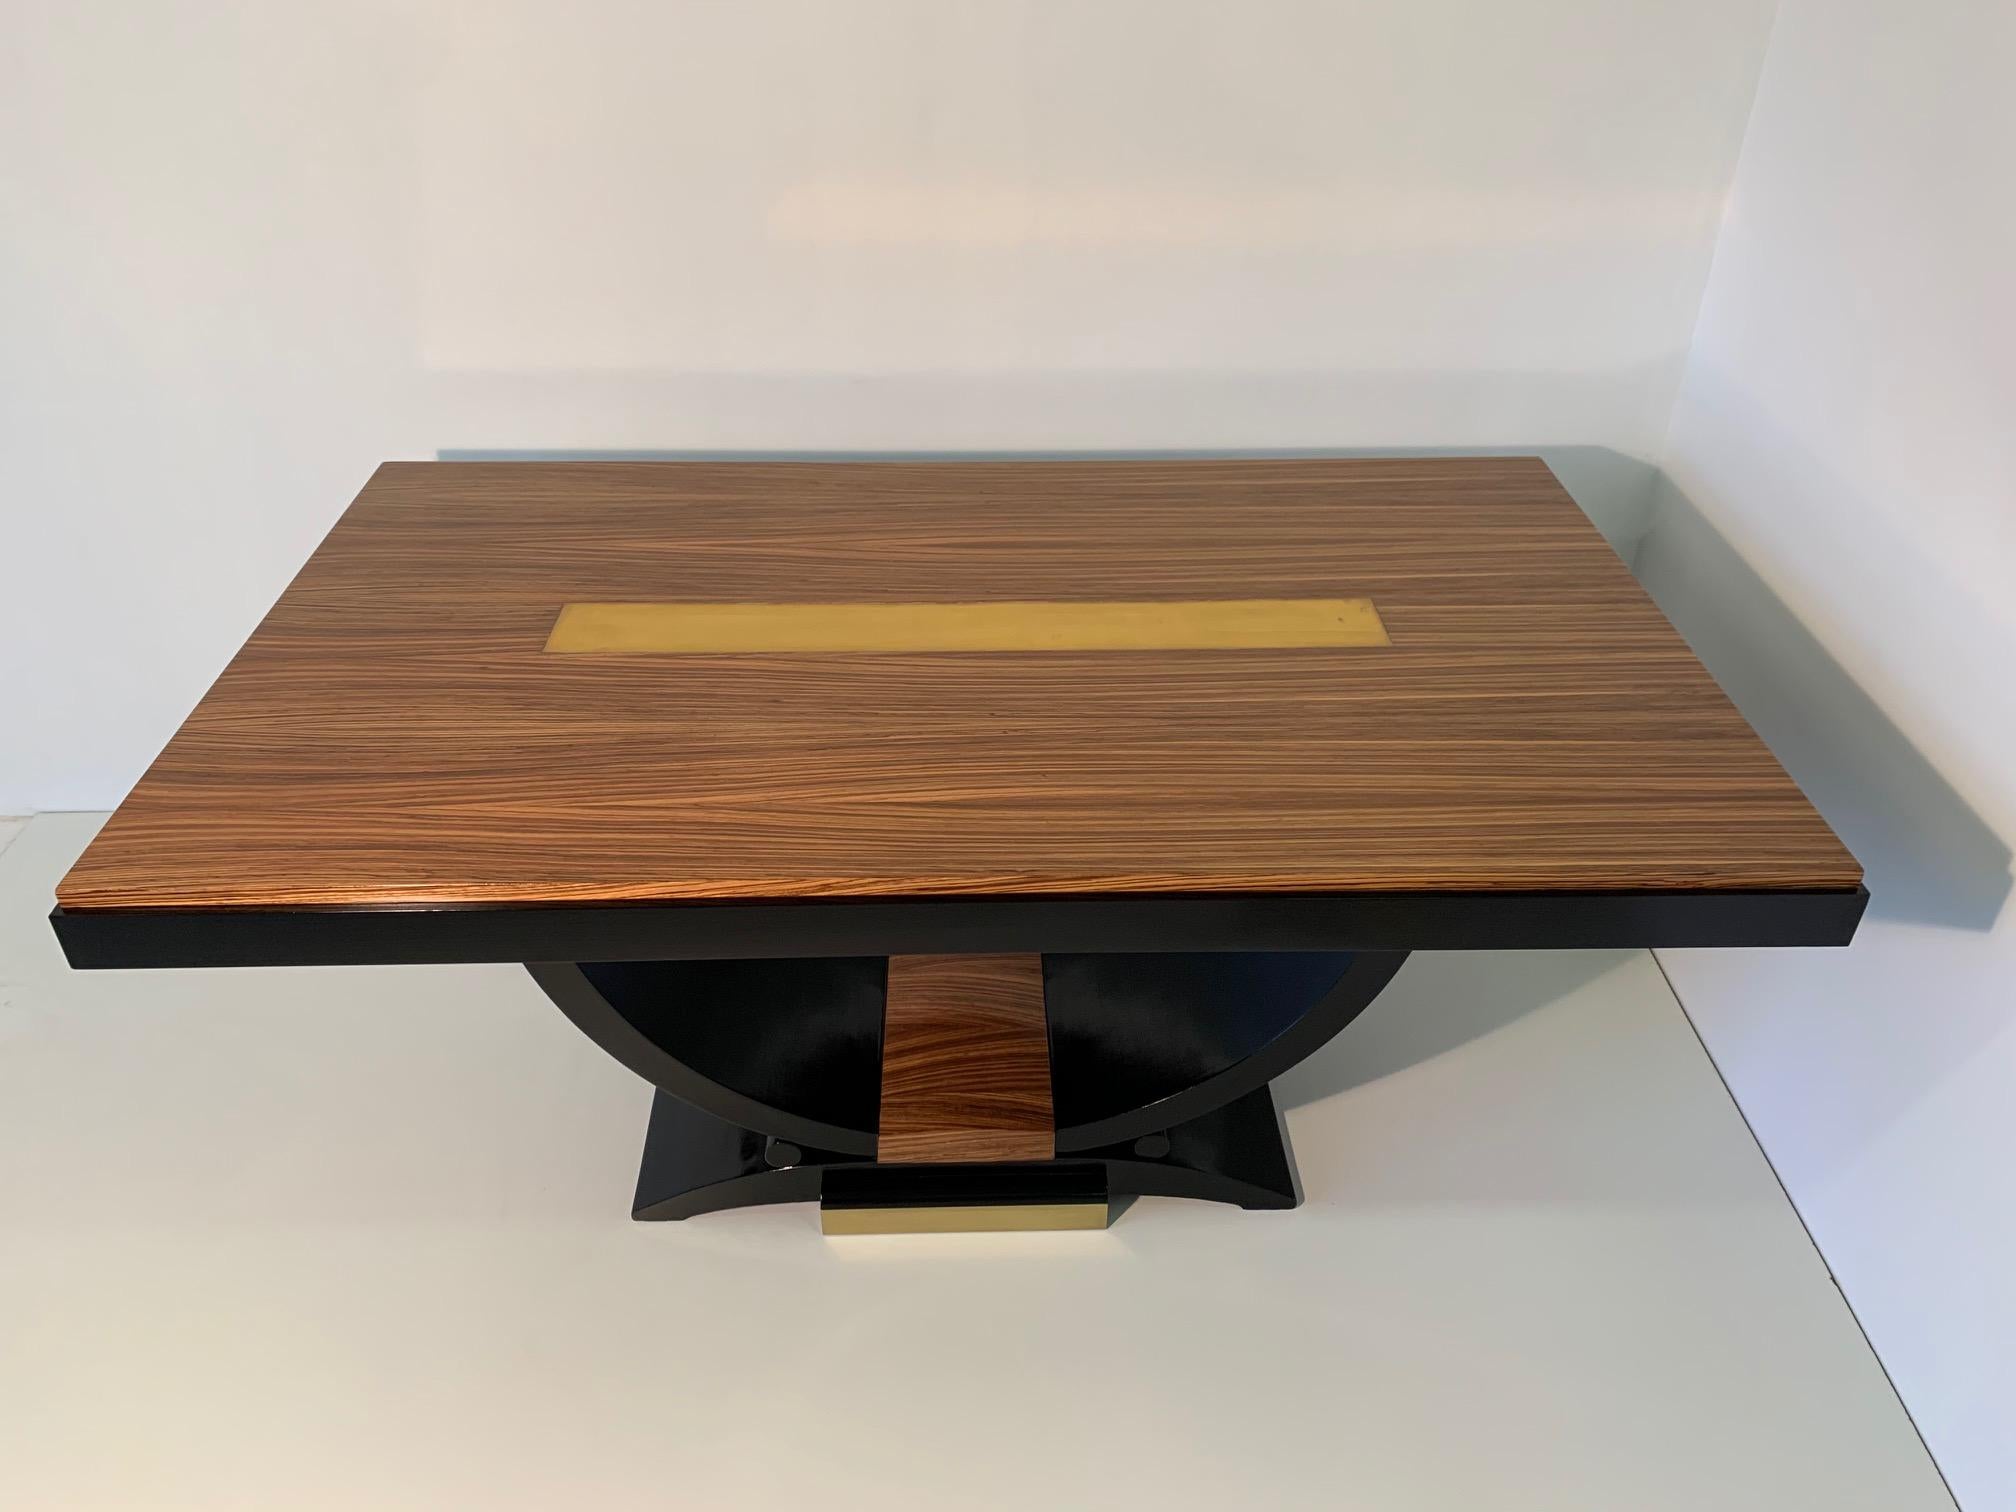 Rare French Art Deco table from the 1930s, the top is covered in zebra wood with a central decoration in brass foil.
The base is black lacquered.
The table is in excellent condition because it has just been restored.